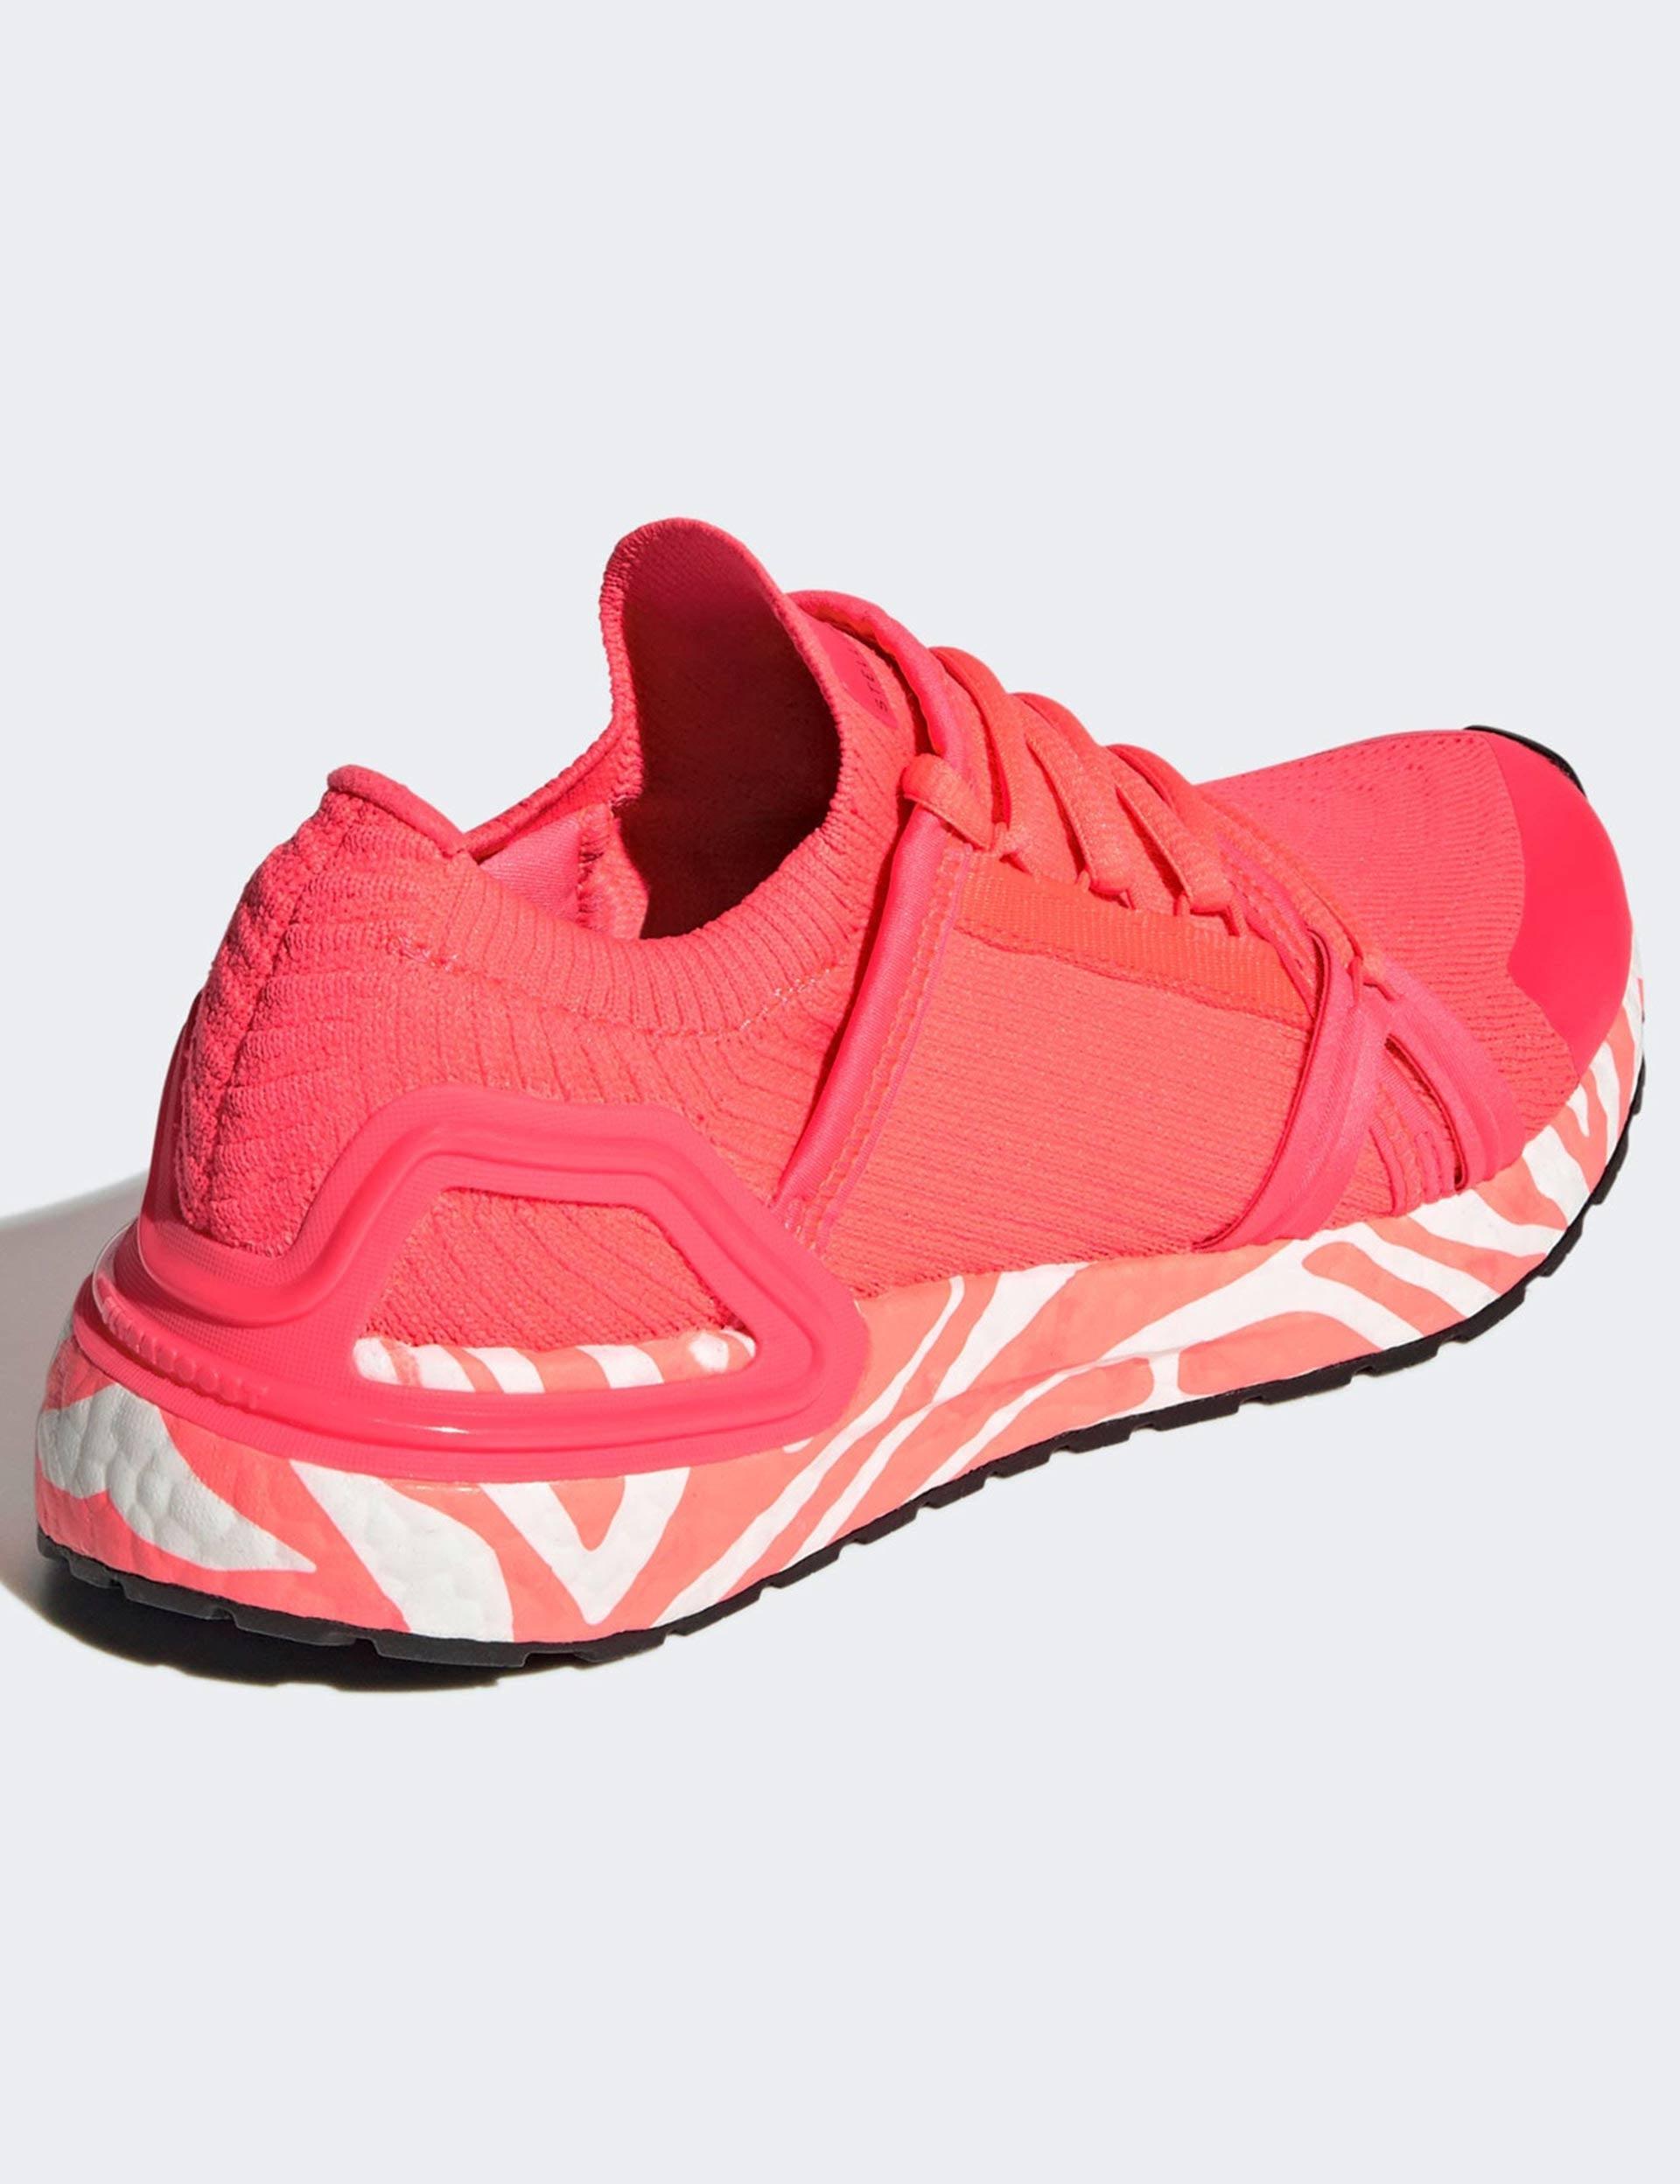 adidas By Stella McCartney Ultraboost 20 Shoes in Pink (Orange) - Save 21%  | Lyst